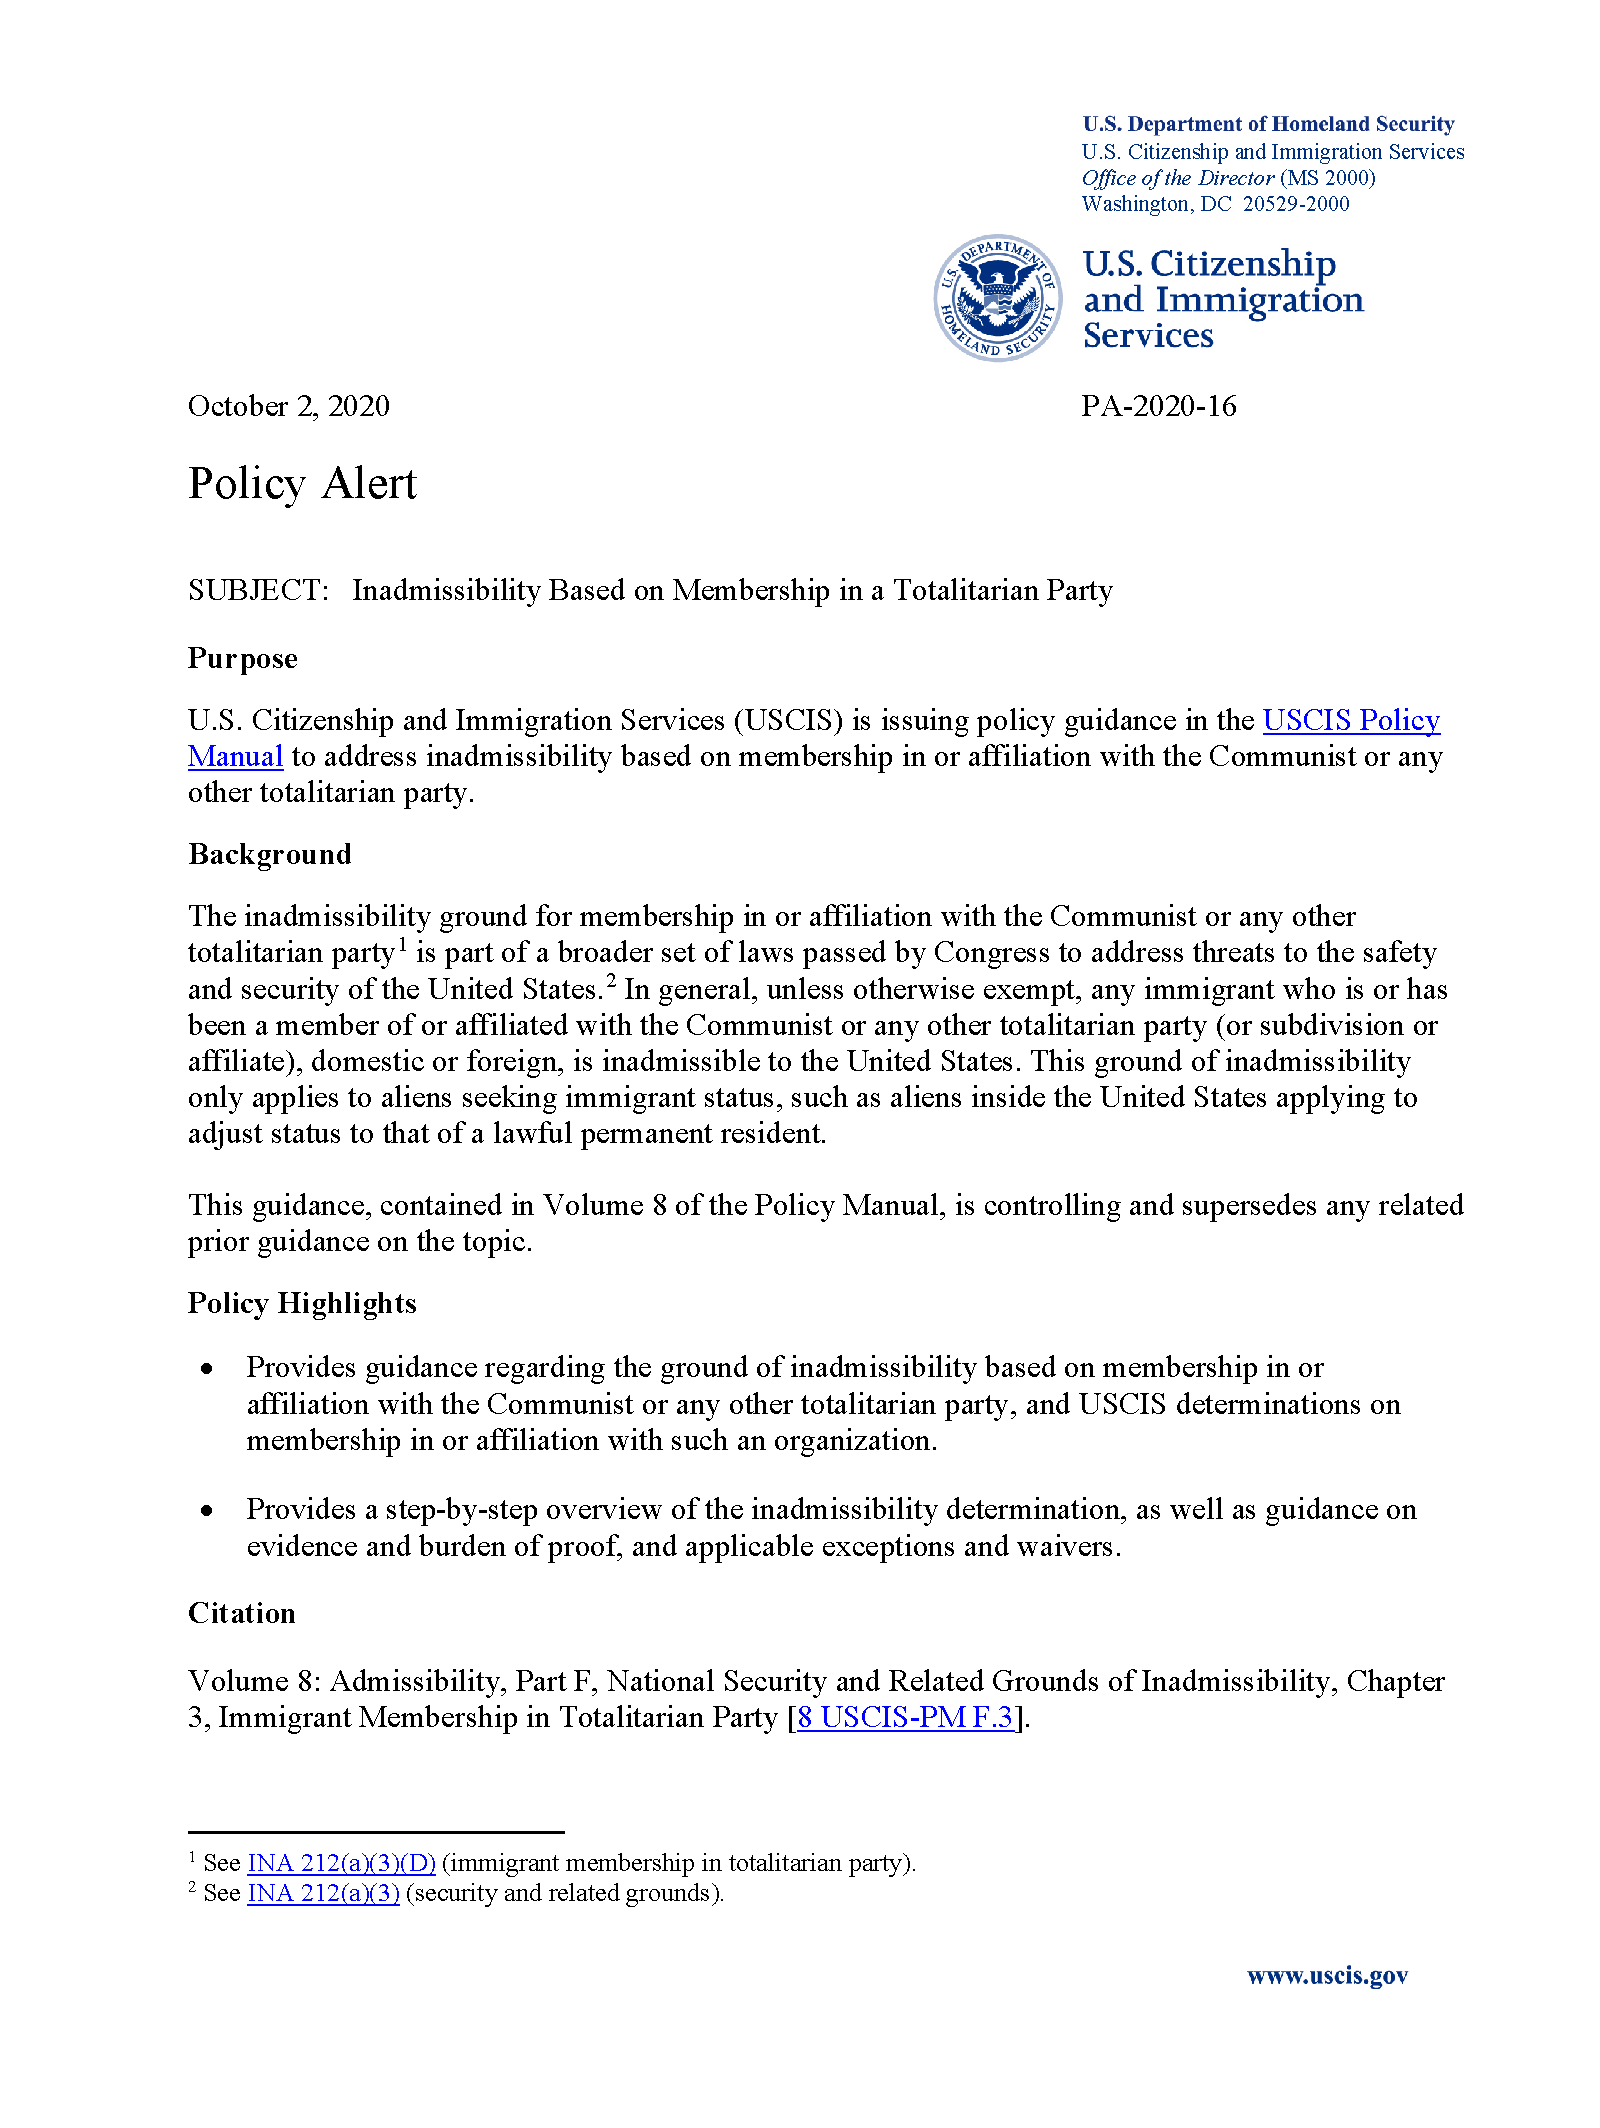 Image for article USCIS Issues Inadmissibility Policy Regarding Chinese Communist Party Members